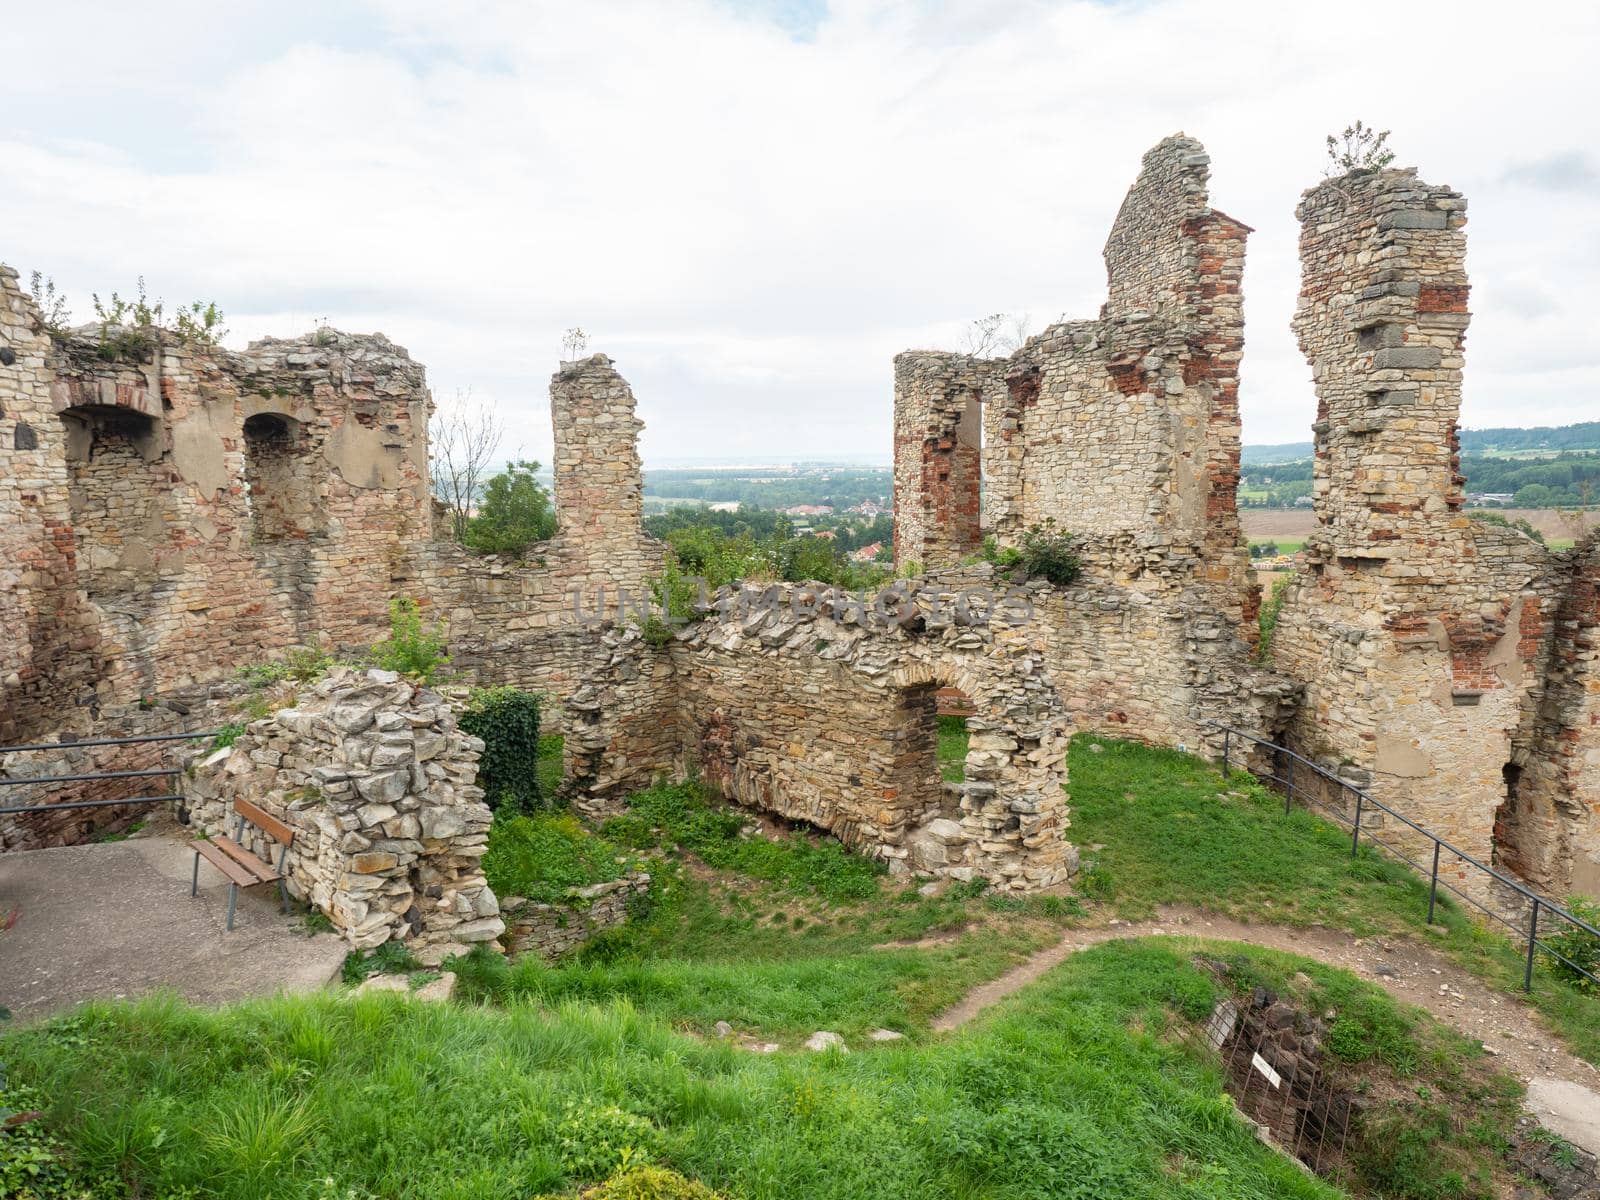 Panoramic view over Kosumberk catle ruin.  Originally a Kalisz castle, later a Catholic one, abandoned in the eighteenth century.